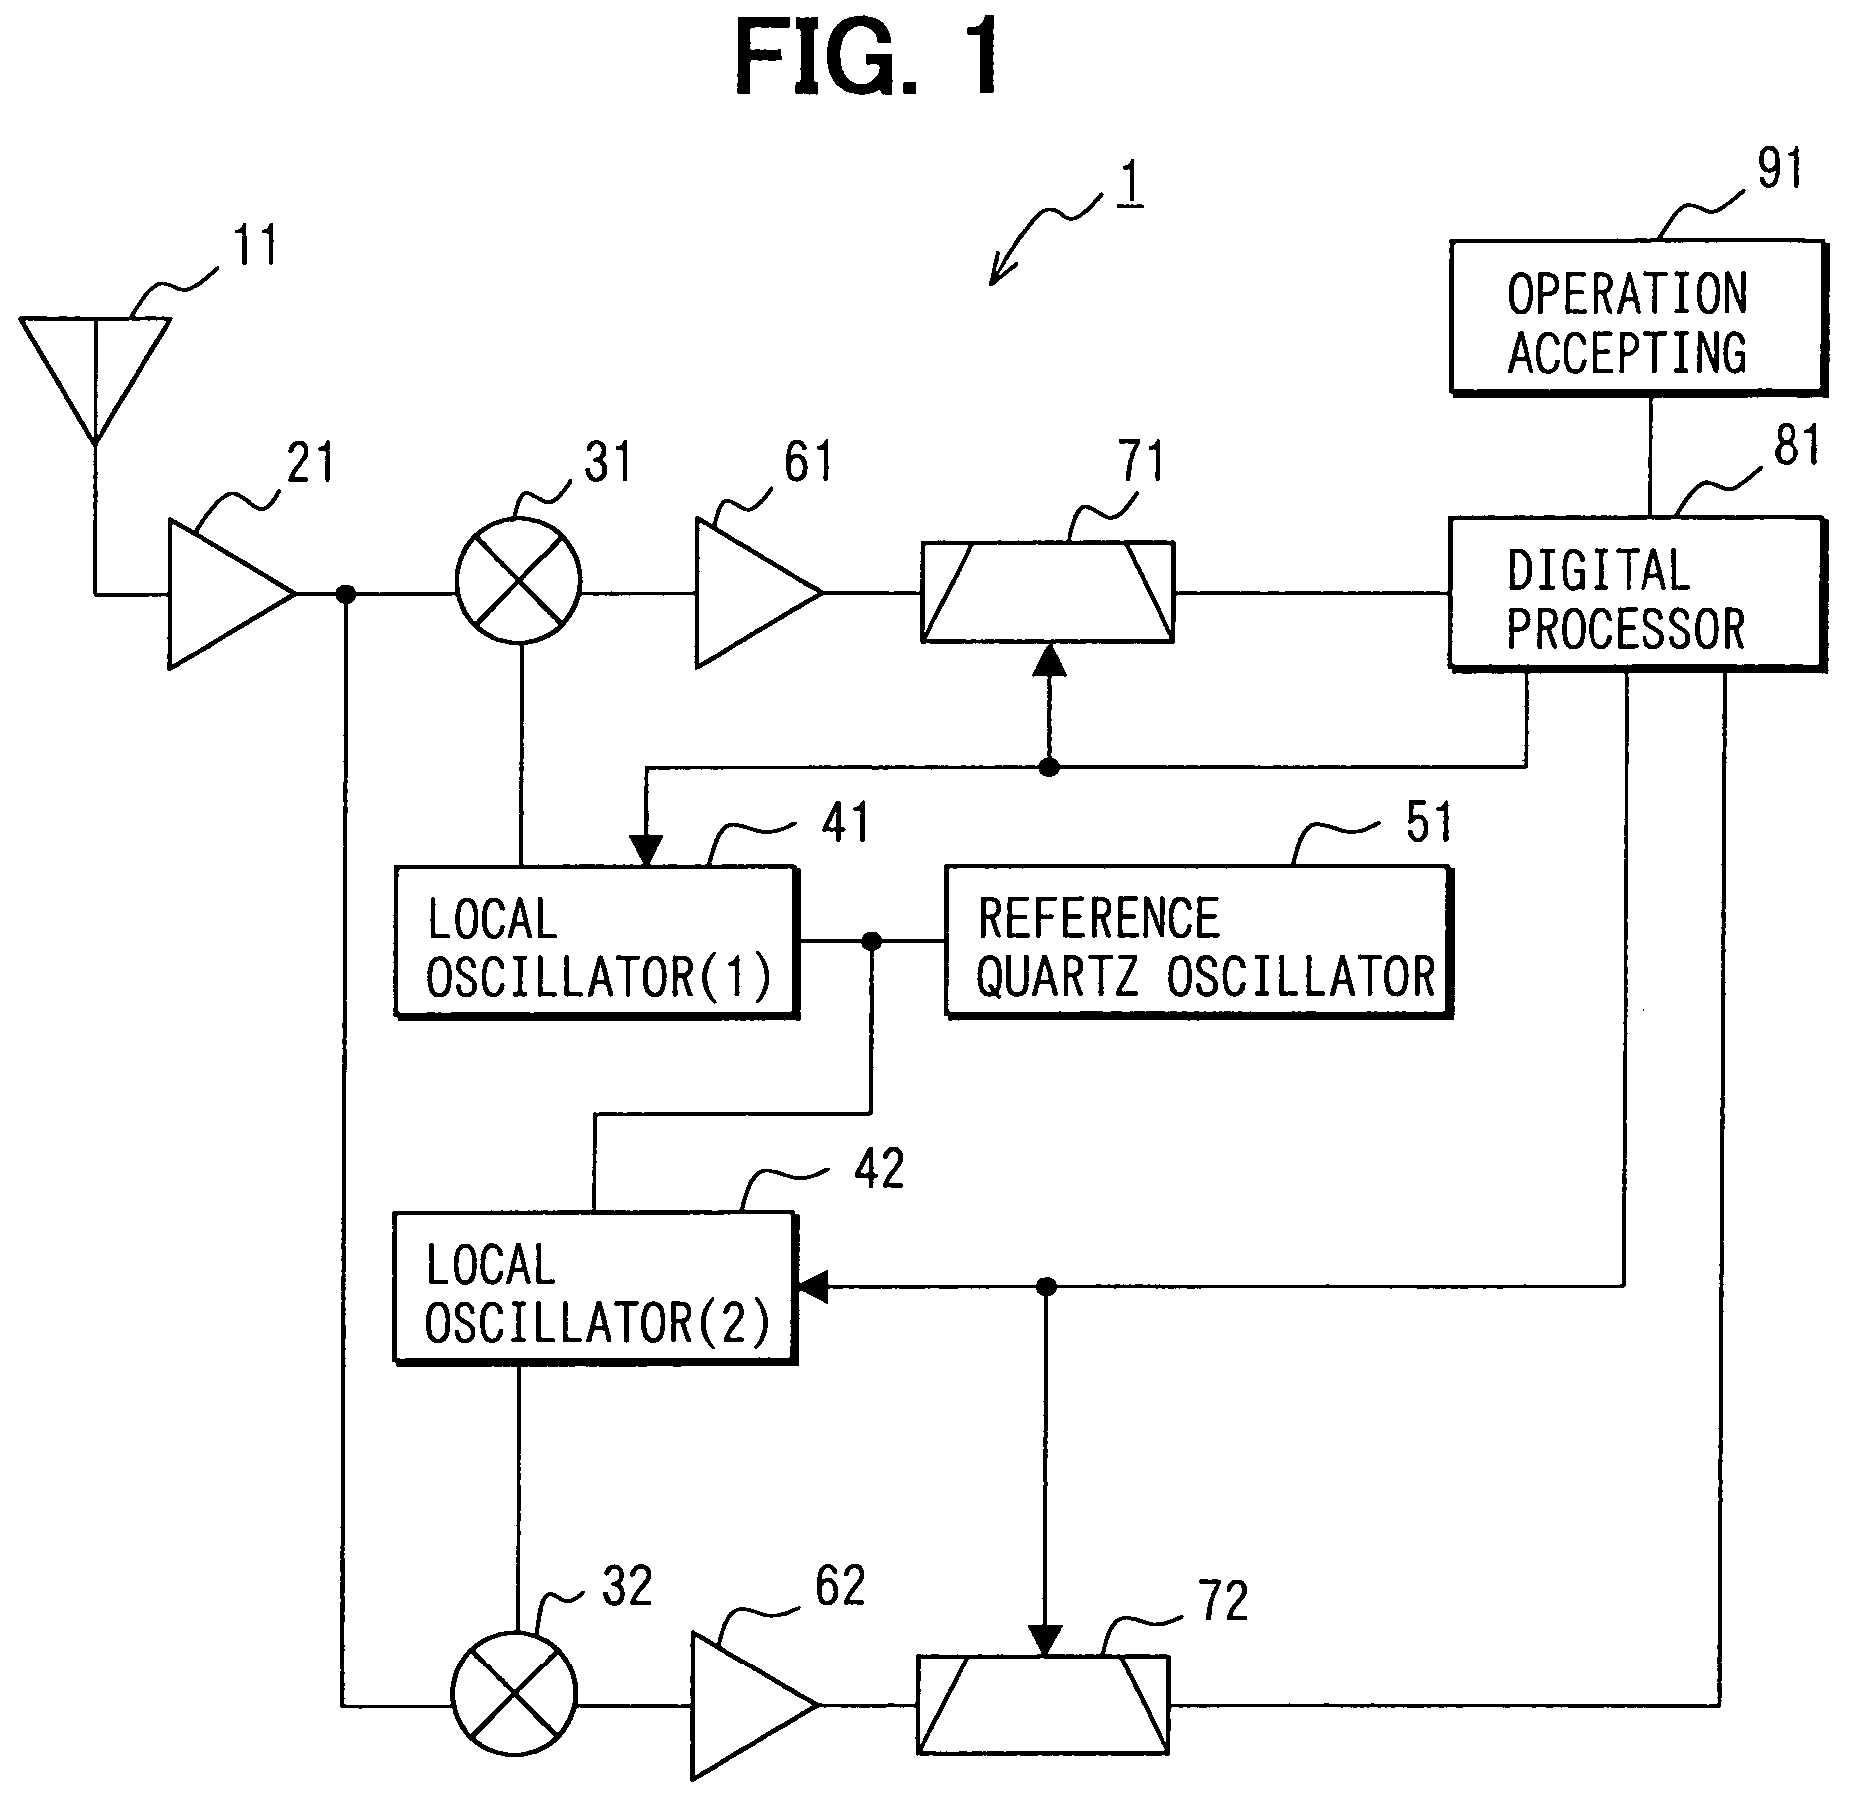 Satellite-positioning signal receiving device